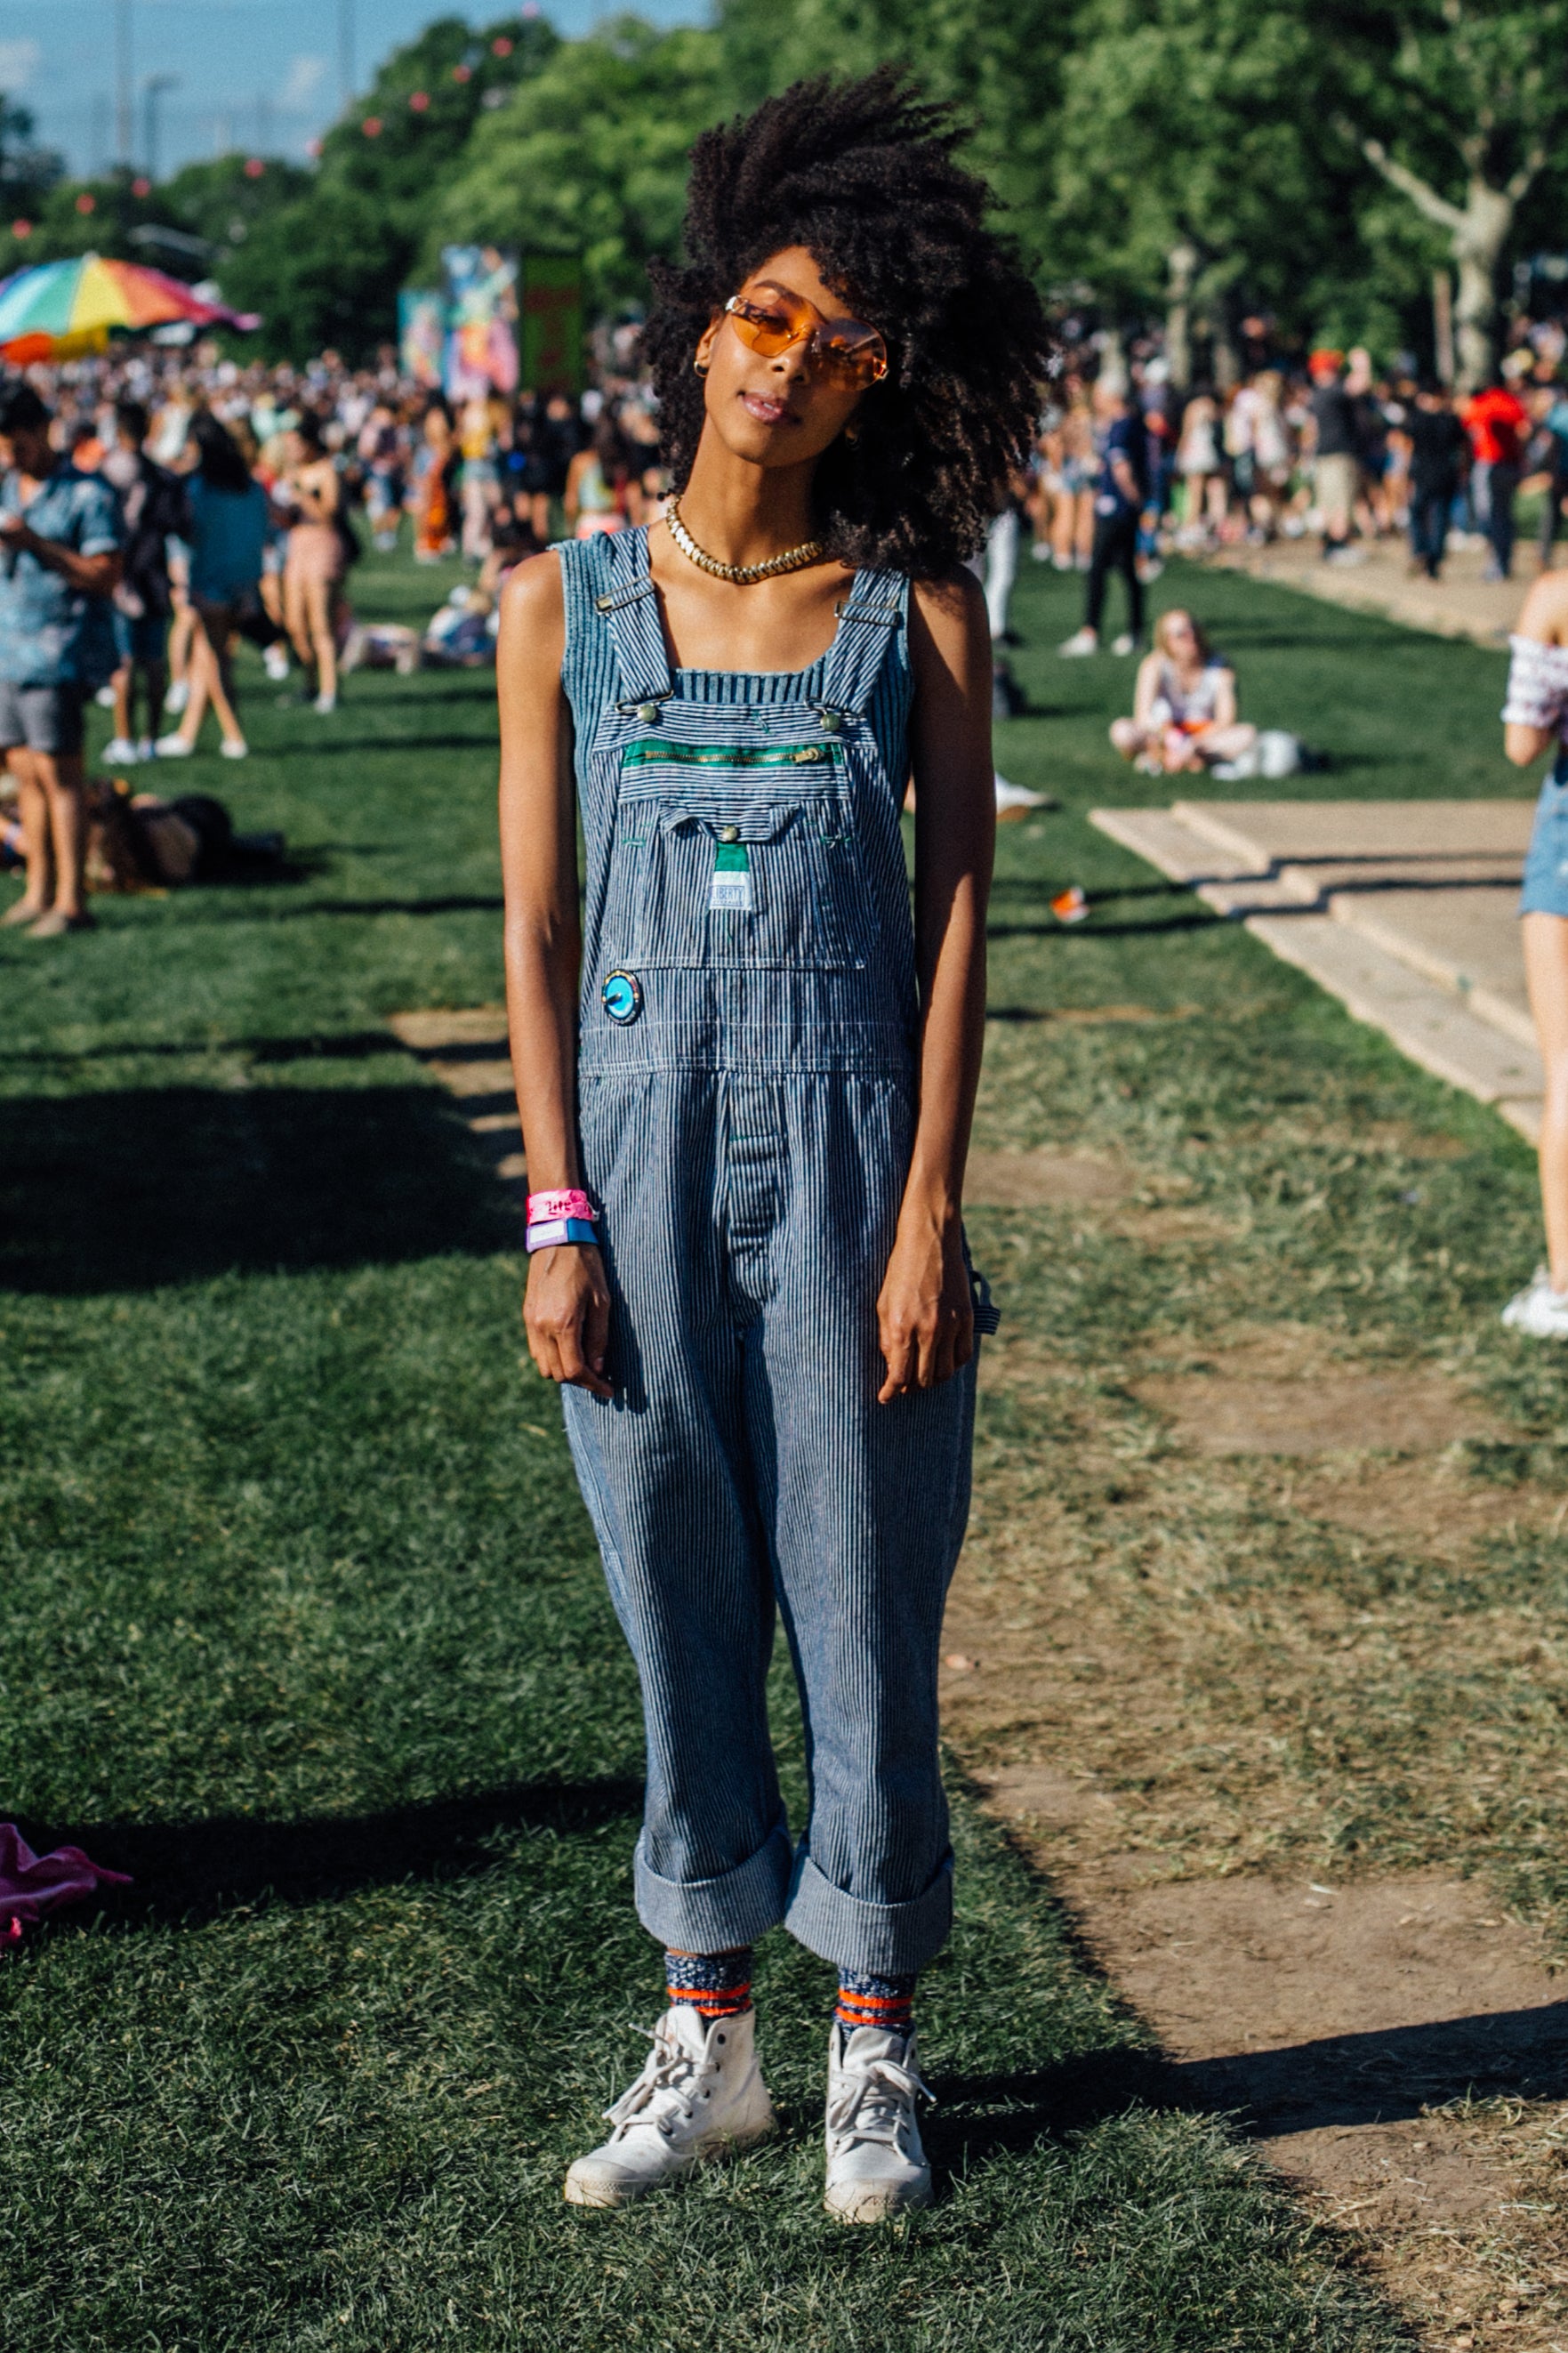 Beautiful Black Women Took Over the Governors Ball Street Style Scene
